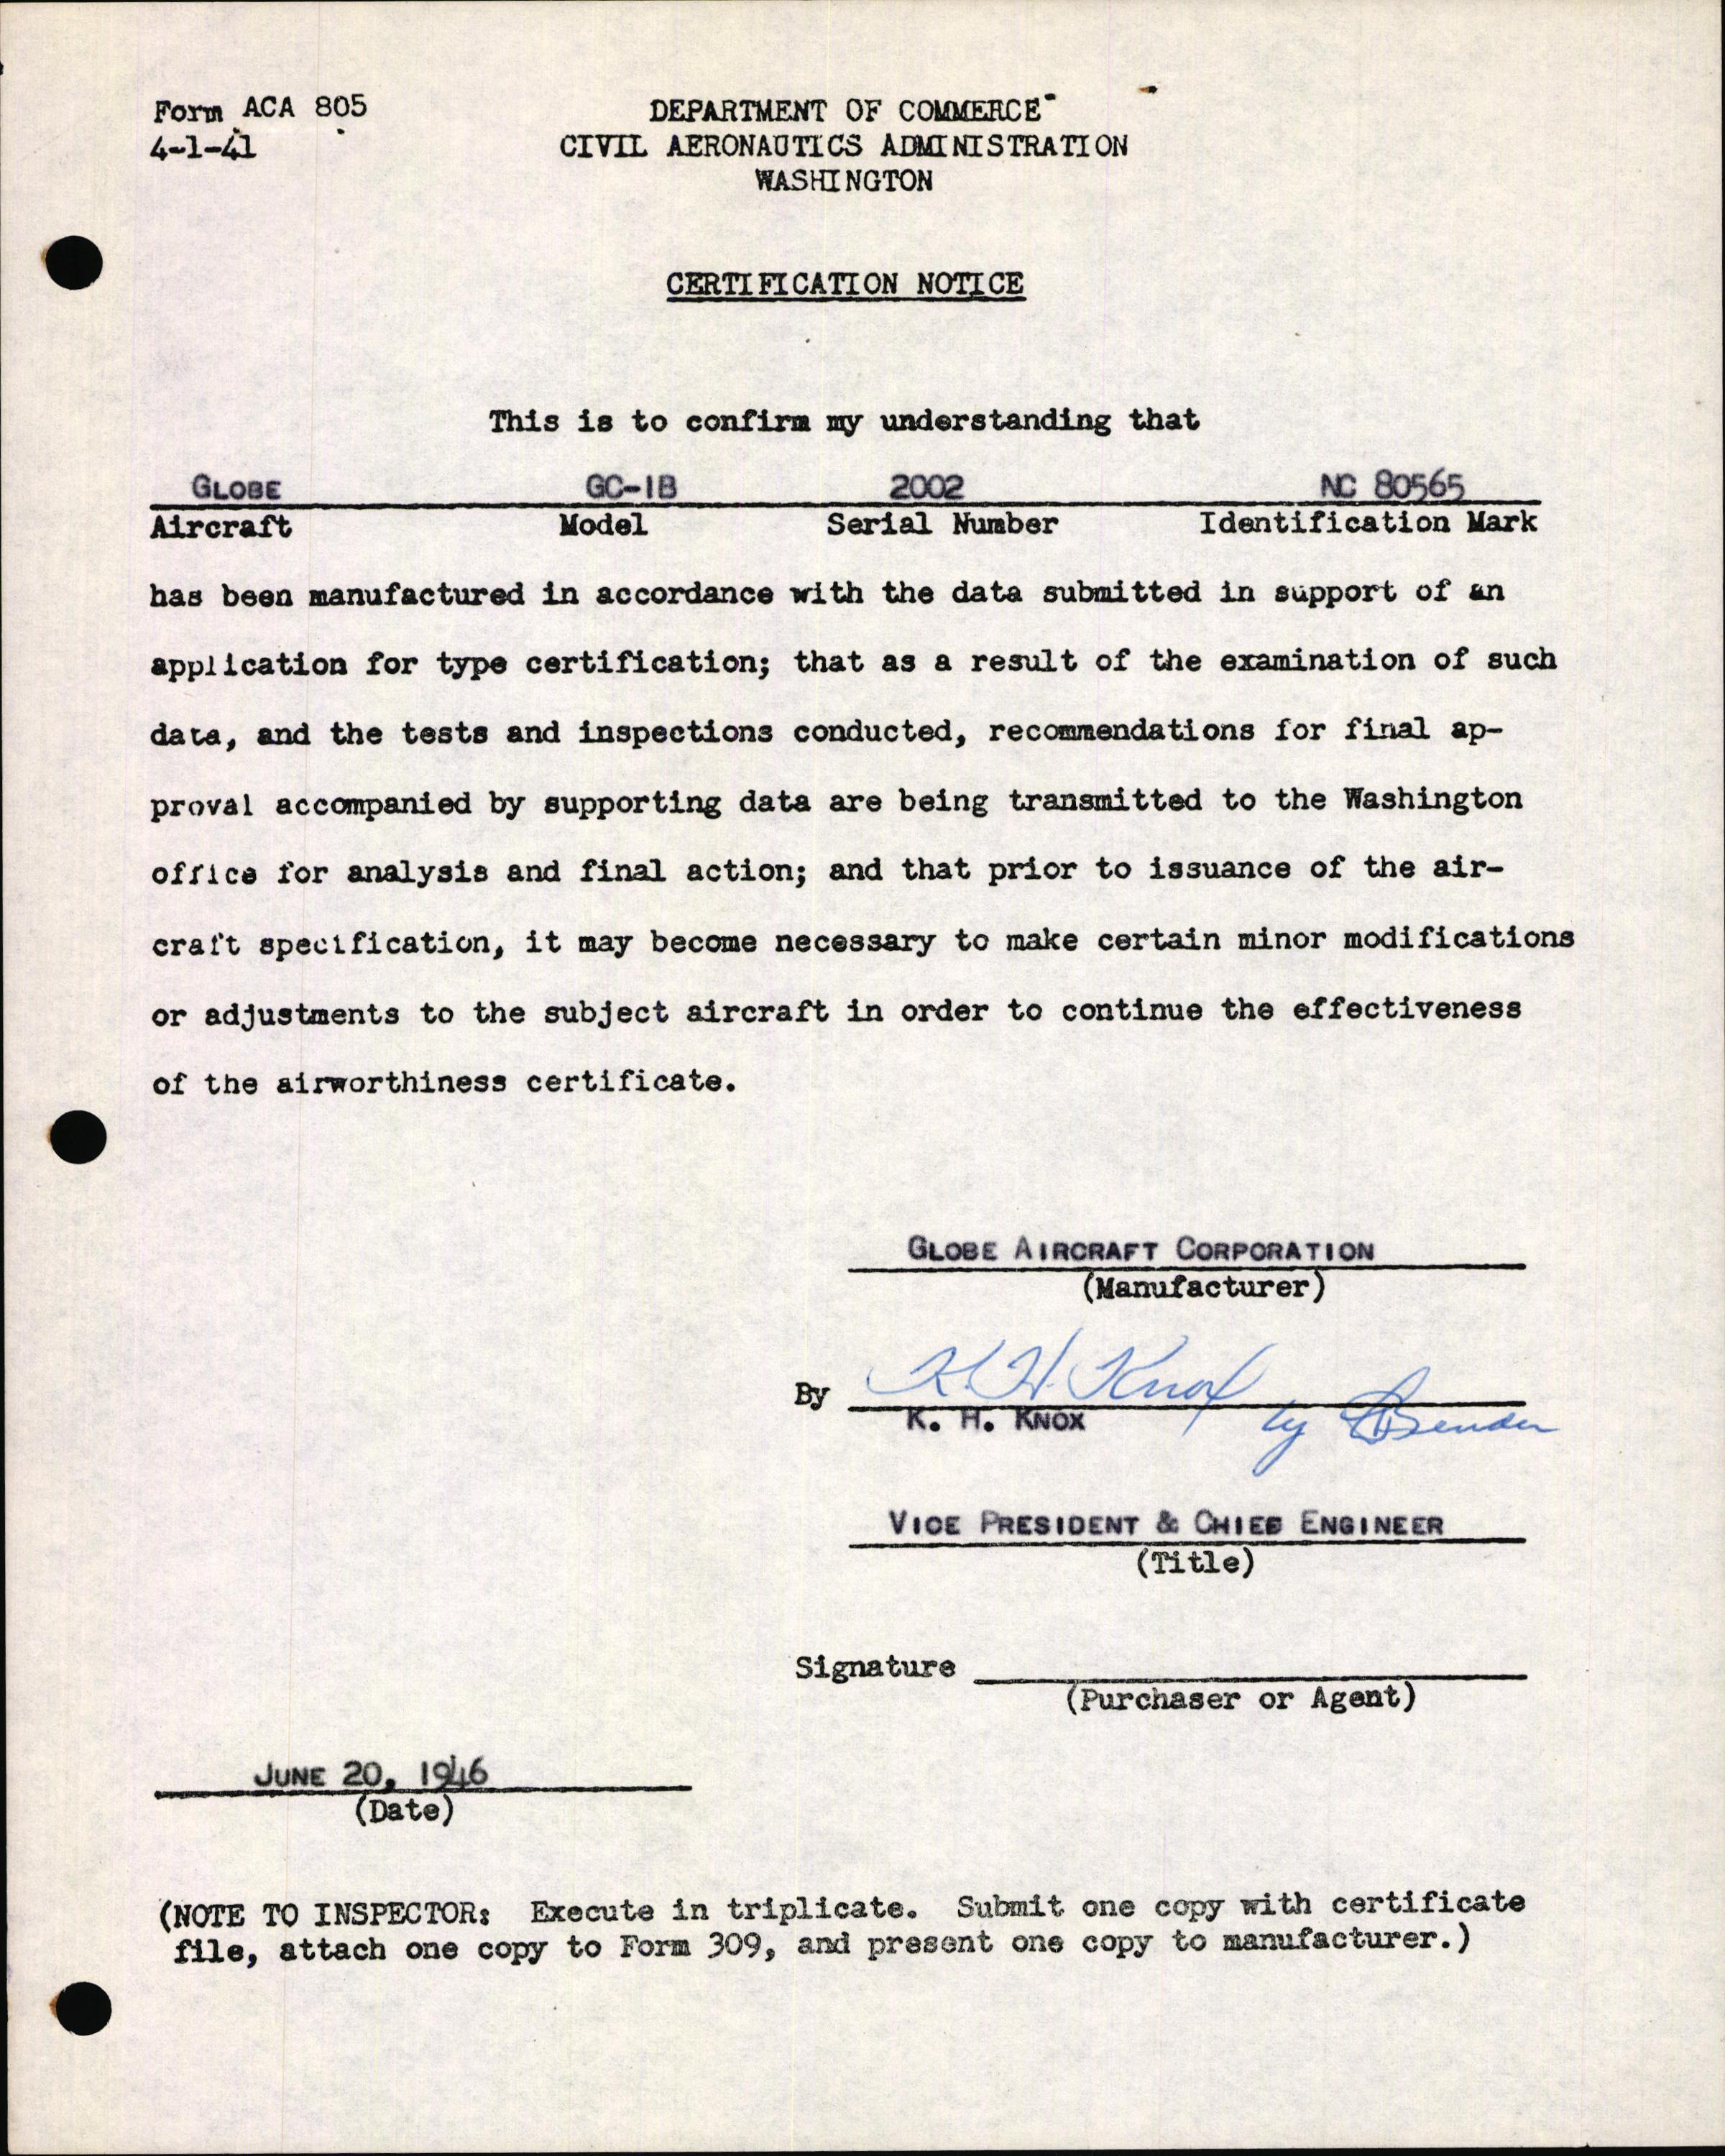 Sample page 5 from AirCorps Library document: Technical Information for Serial Number 2002